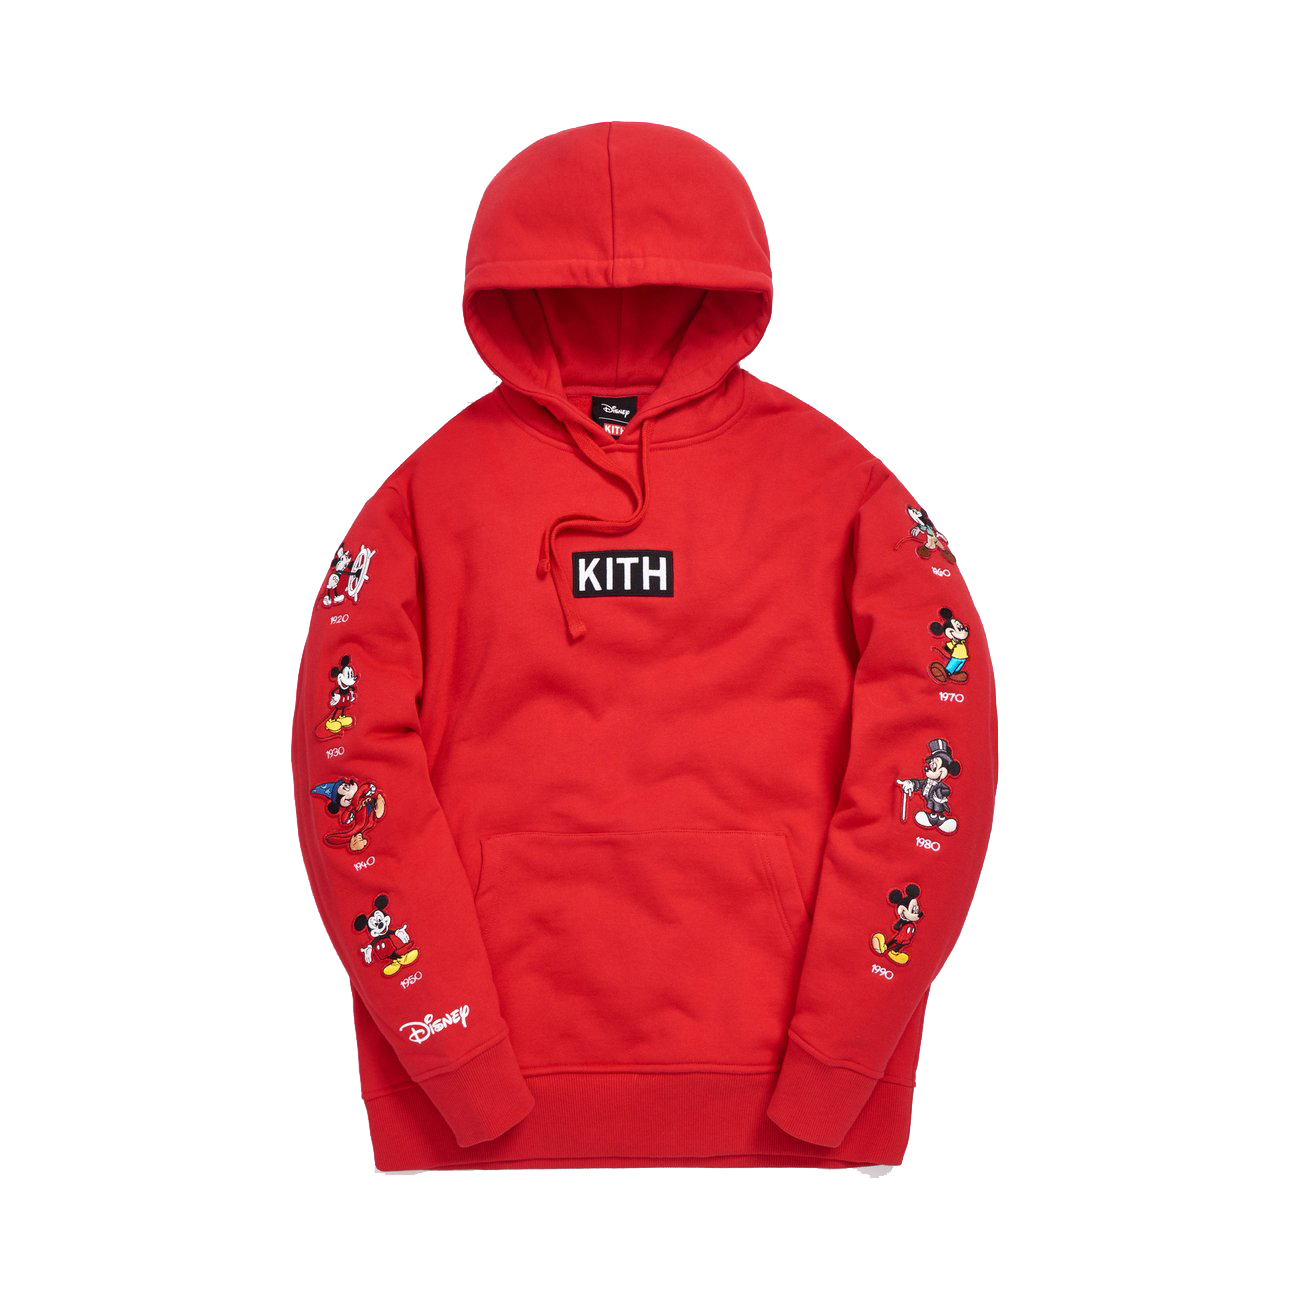 Kith x Disney Mickey Sleeve Patches Hoodie Red Men's - FW19 - US